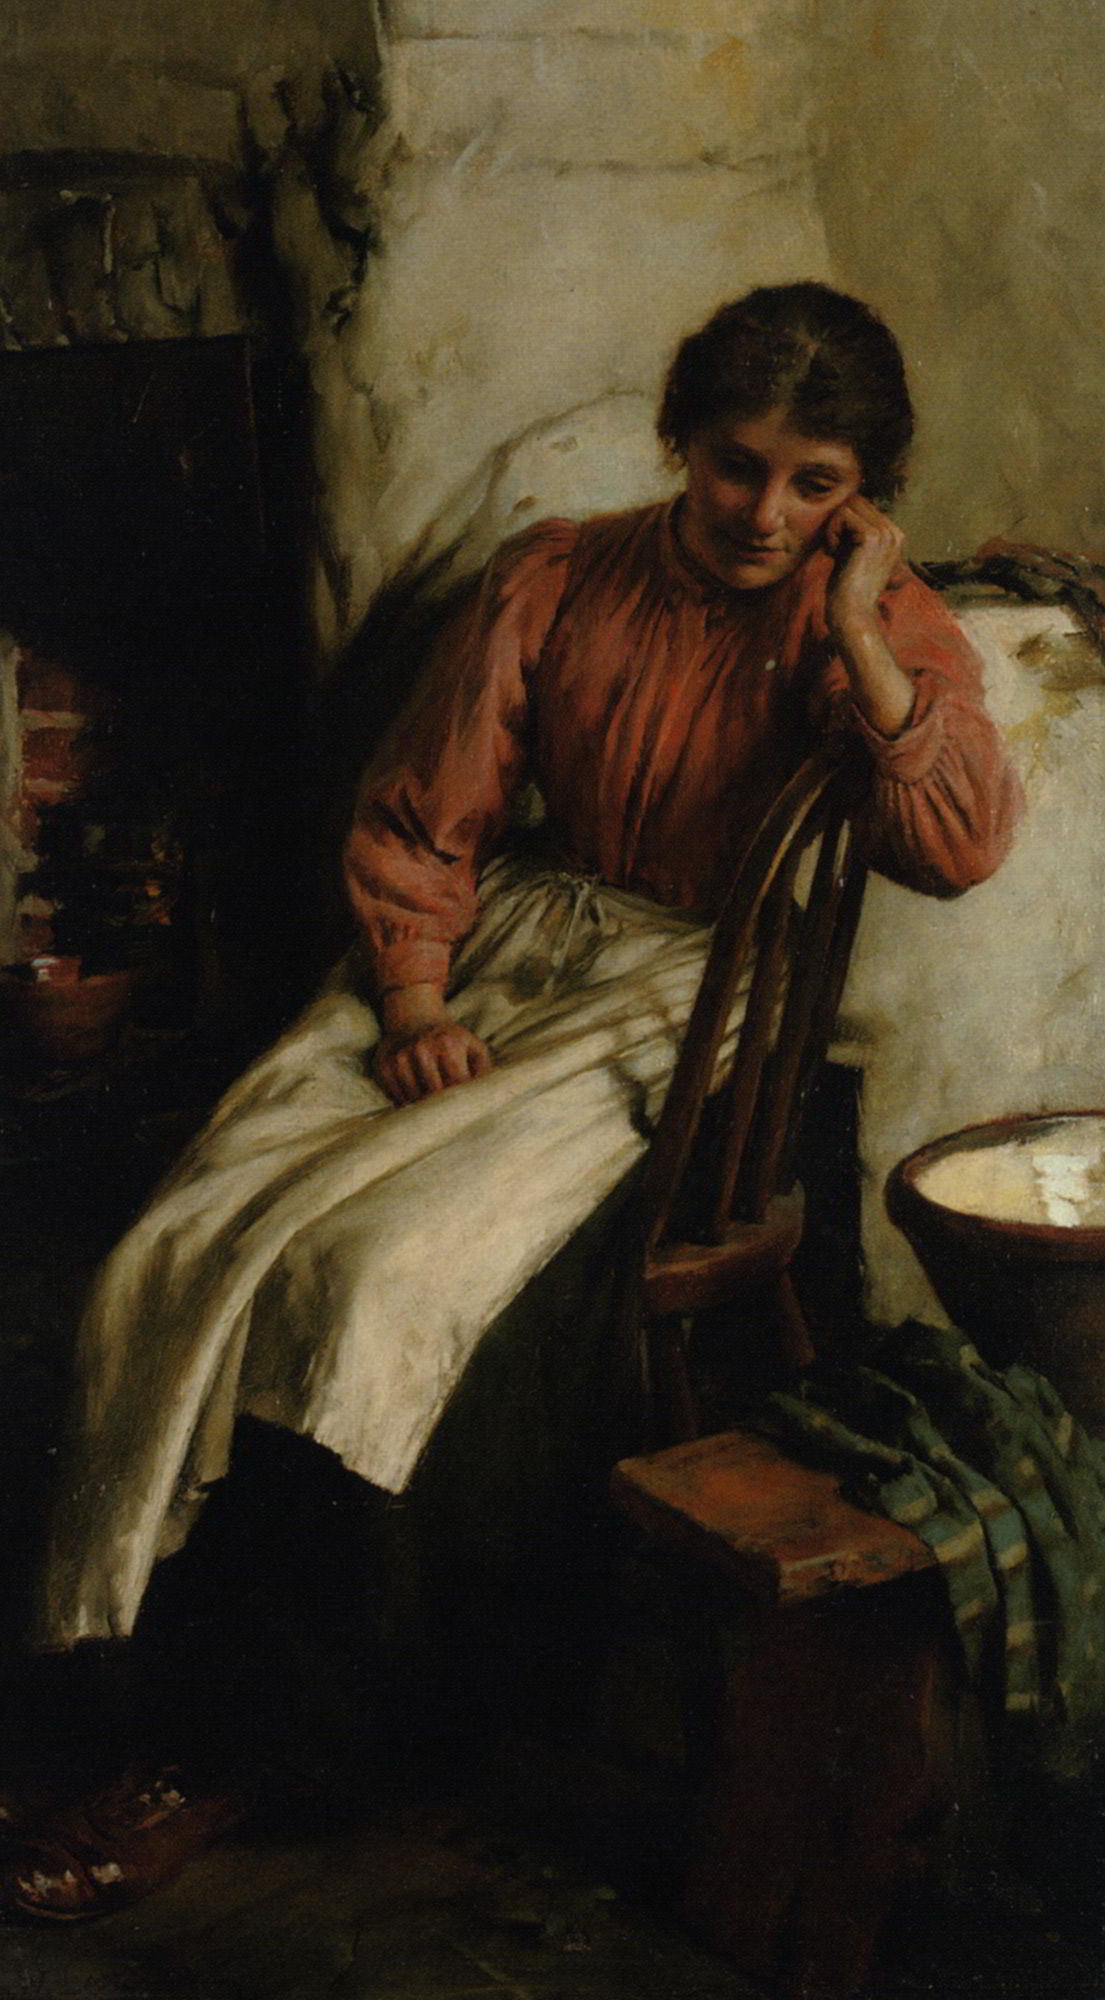 Reverie by Walter Langley